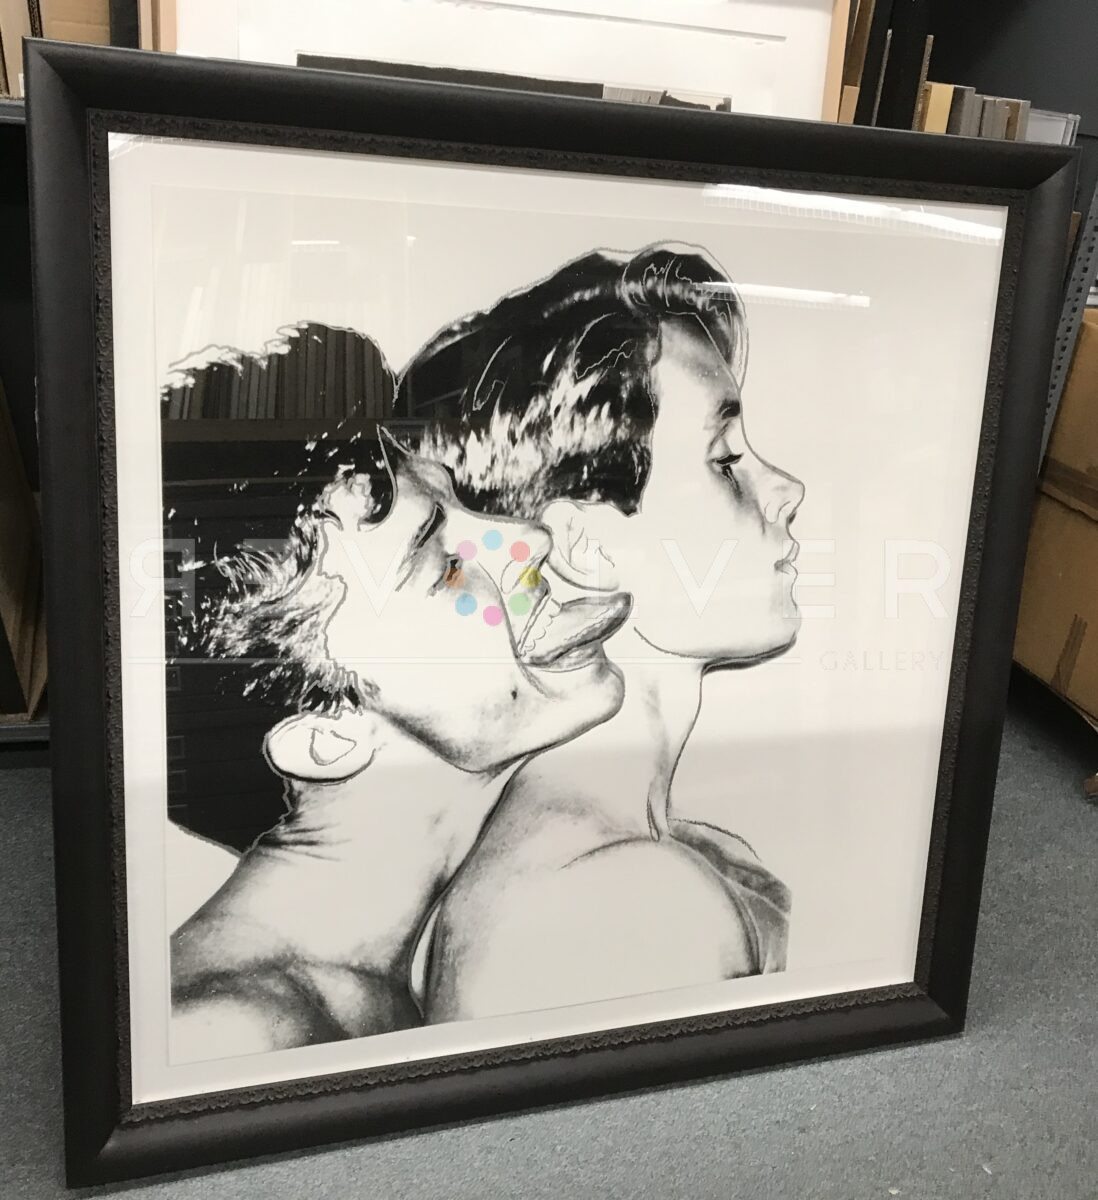 The White Querelle screenprint by Andy Warhol in frame